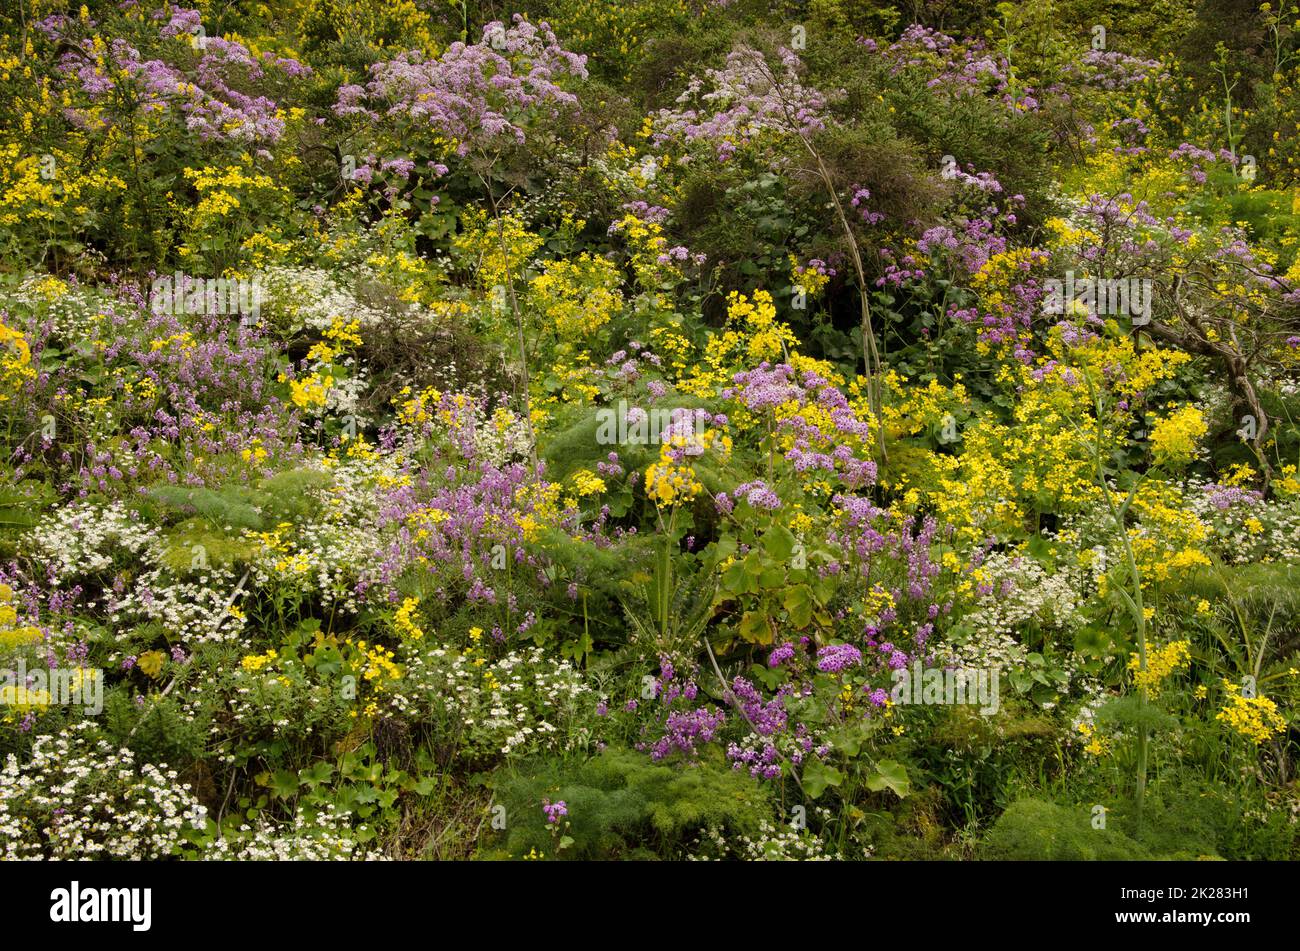 Biodiversity of flowering plants in the field. Stock Photo